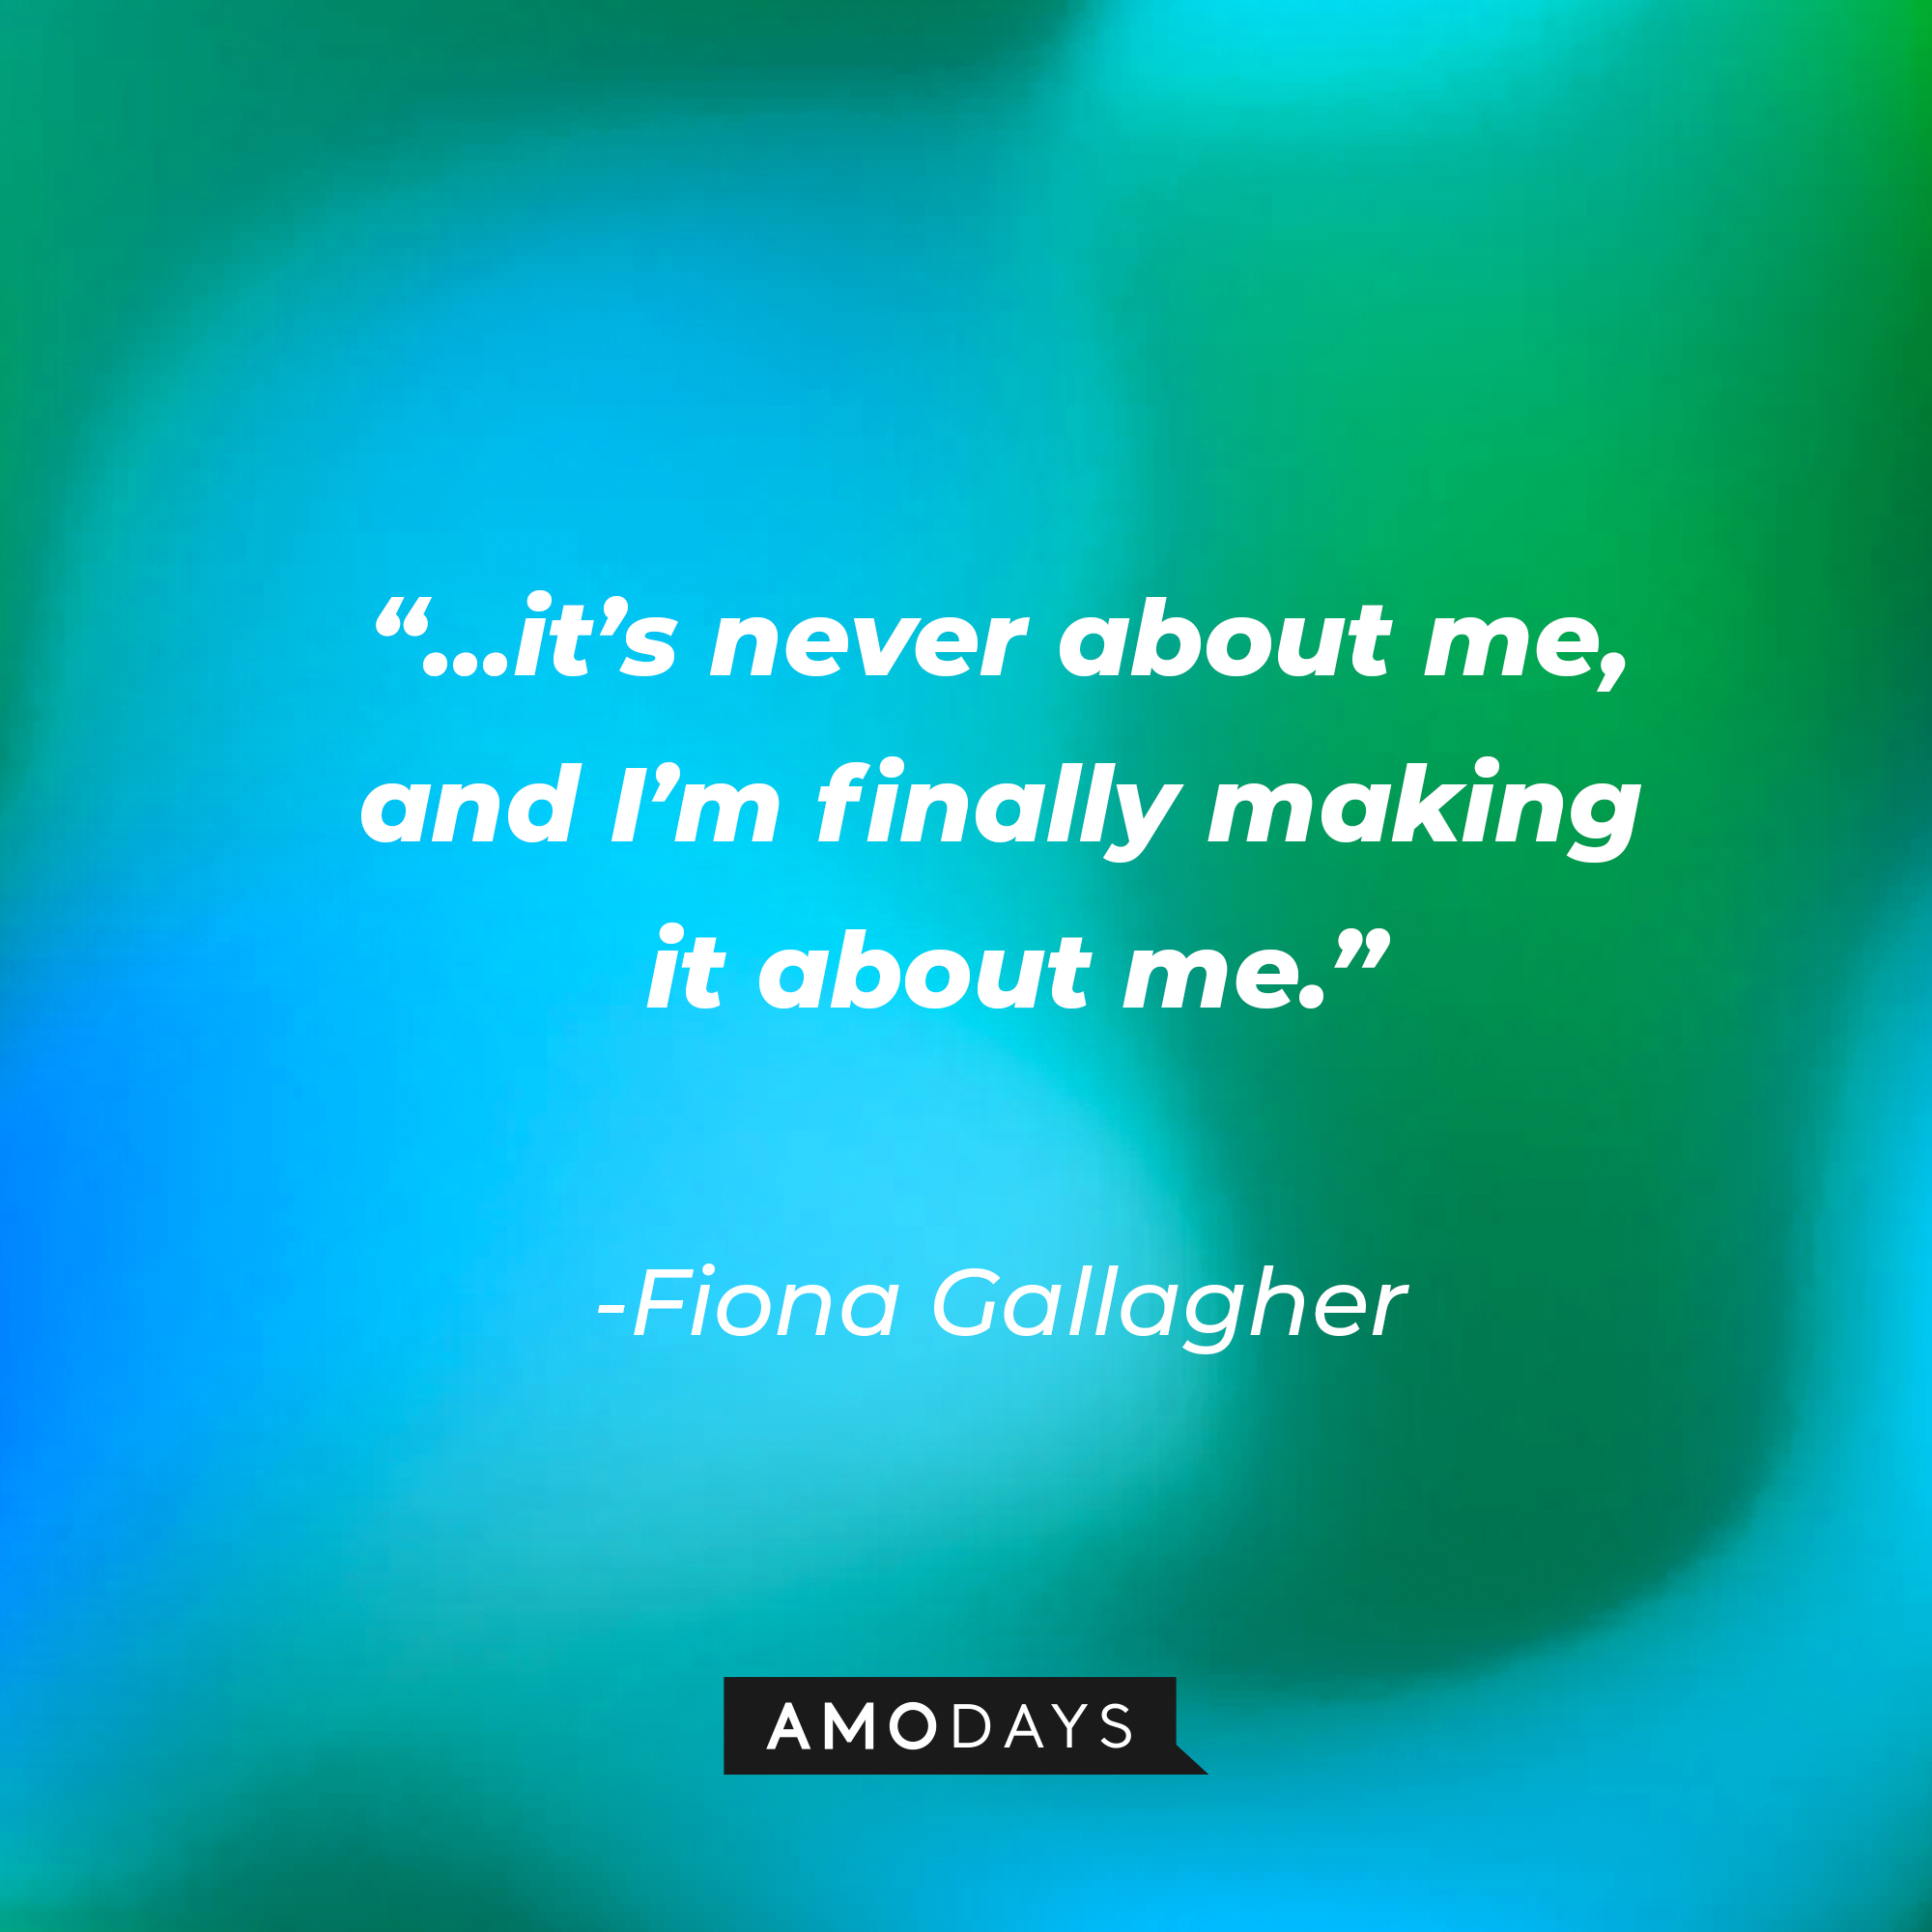 Fiona Gallagher’s quote: “...it’s never about me and I’m finally making it about me.” | Source: AmoDays